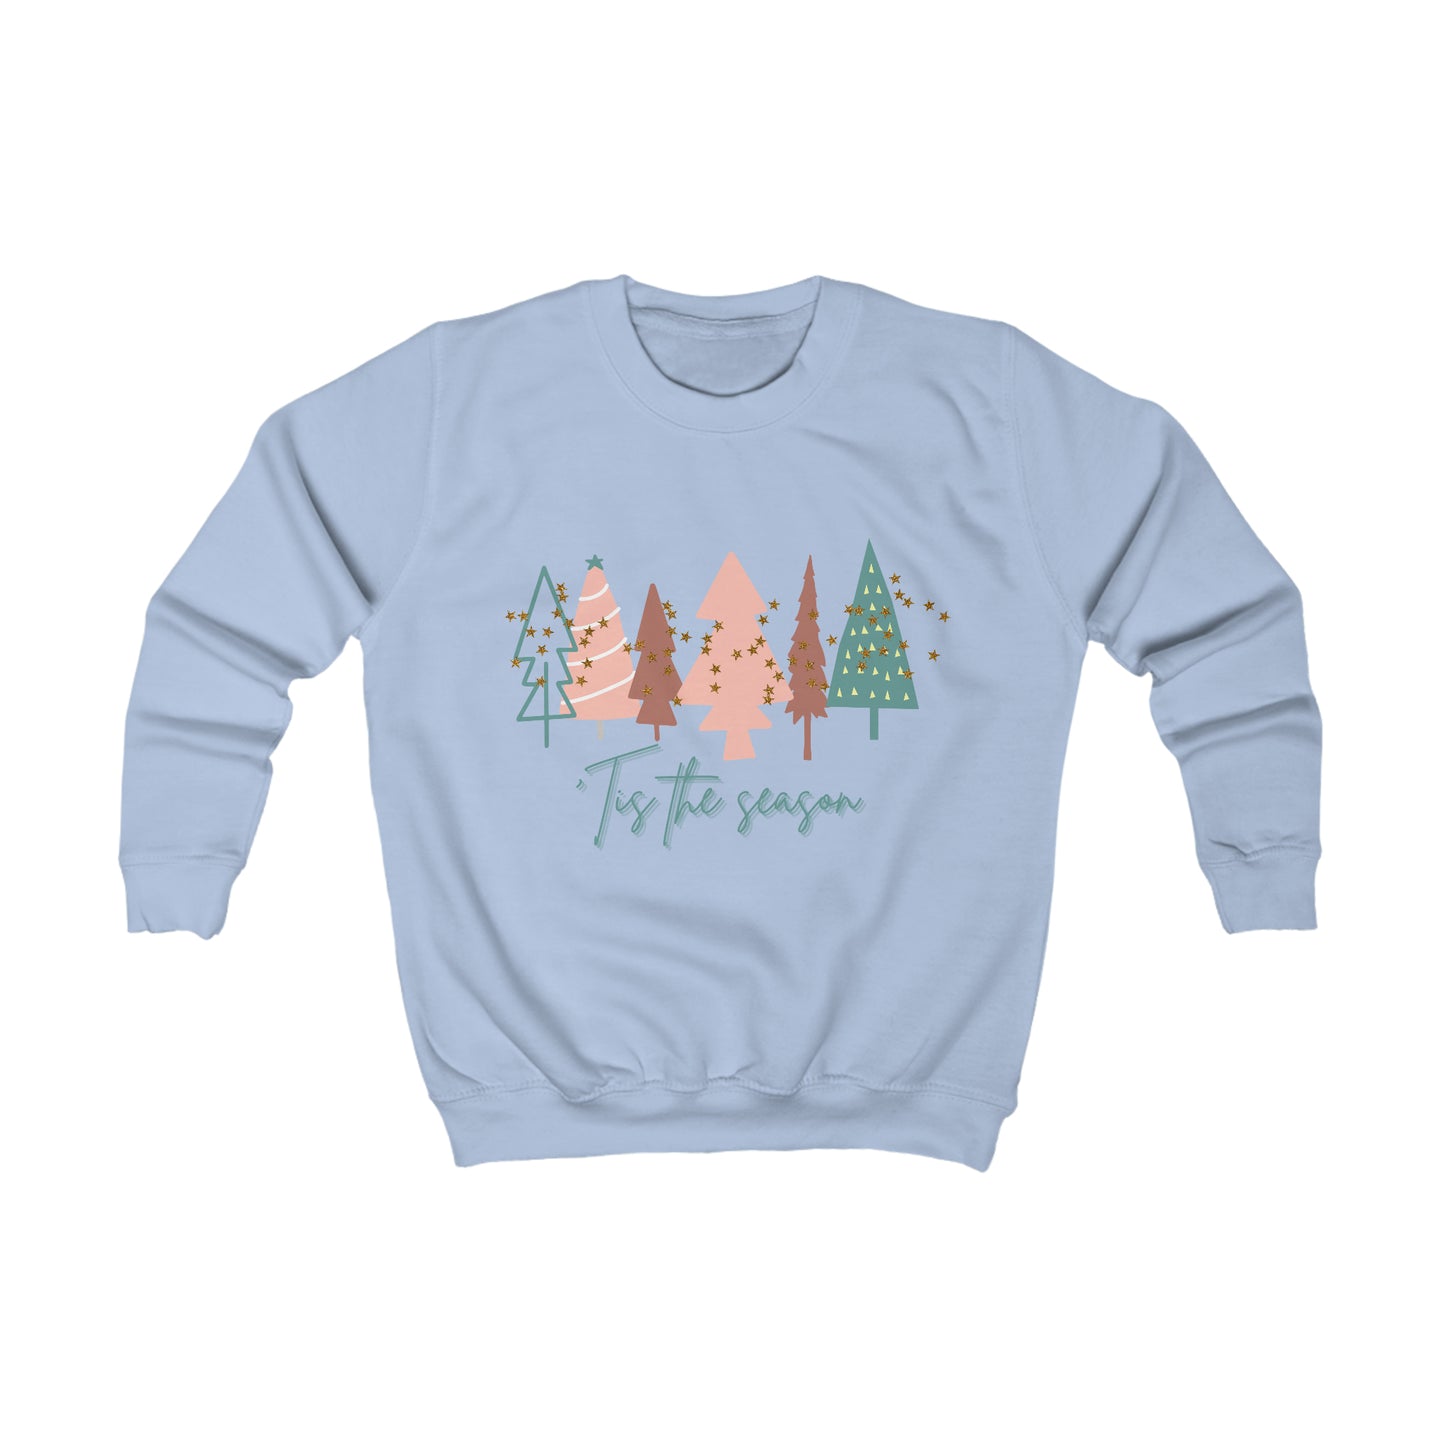 A cozy Printify Youth Sweatshirt with trees on it, perfect for the winter months.